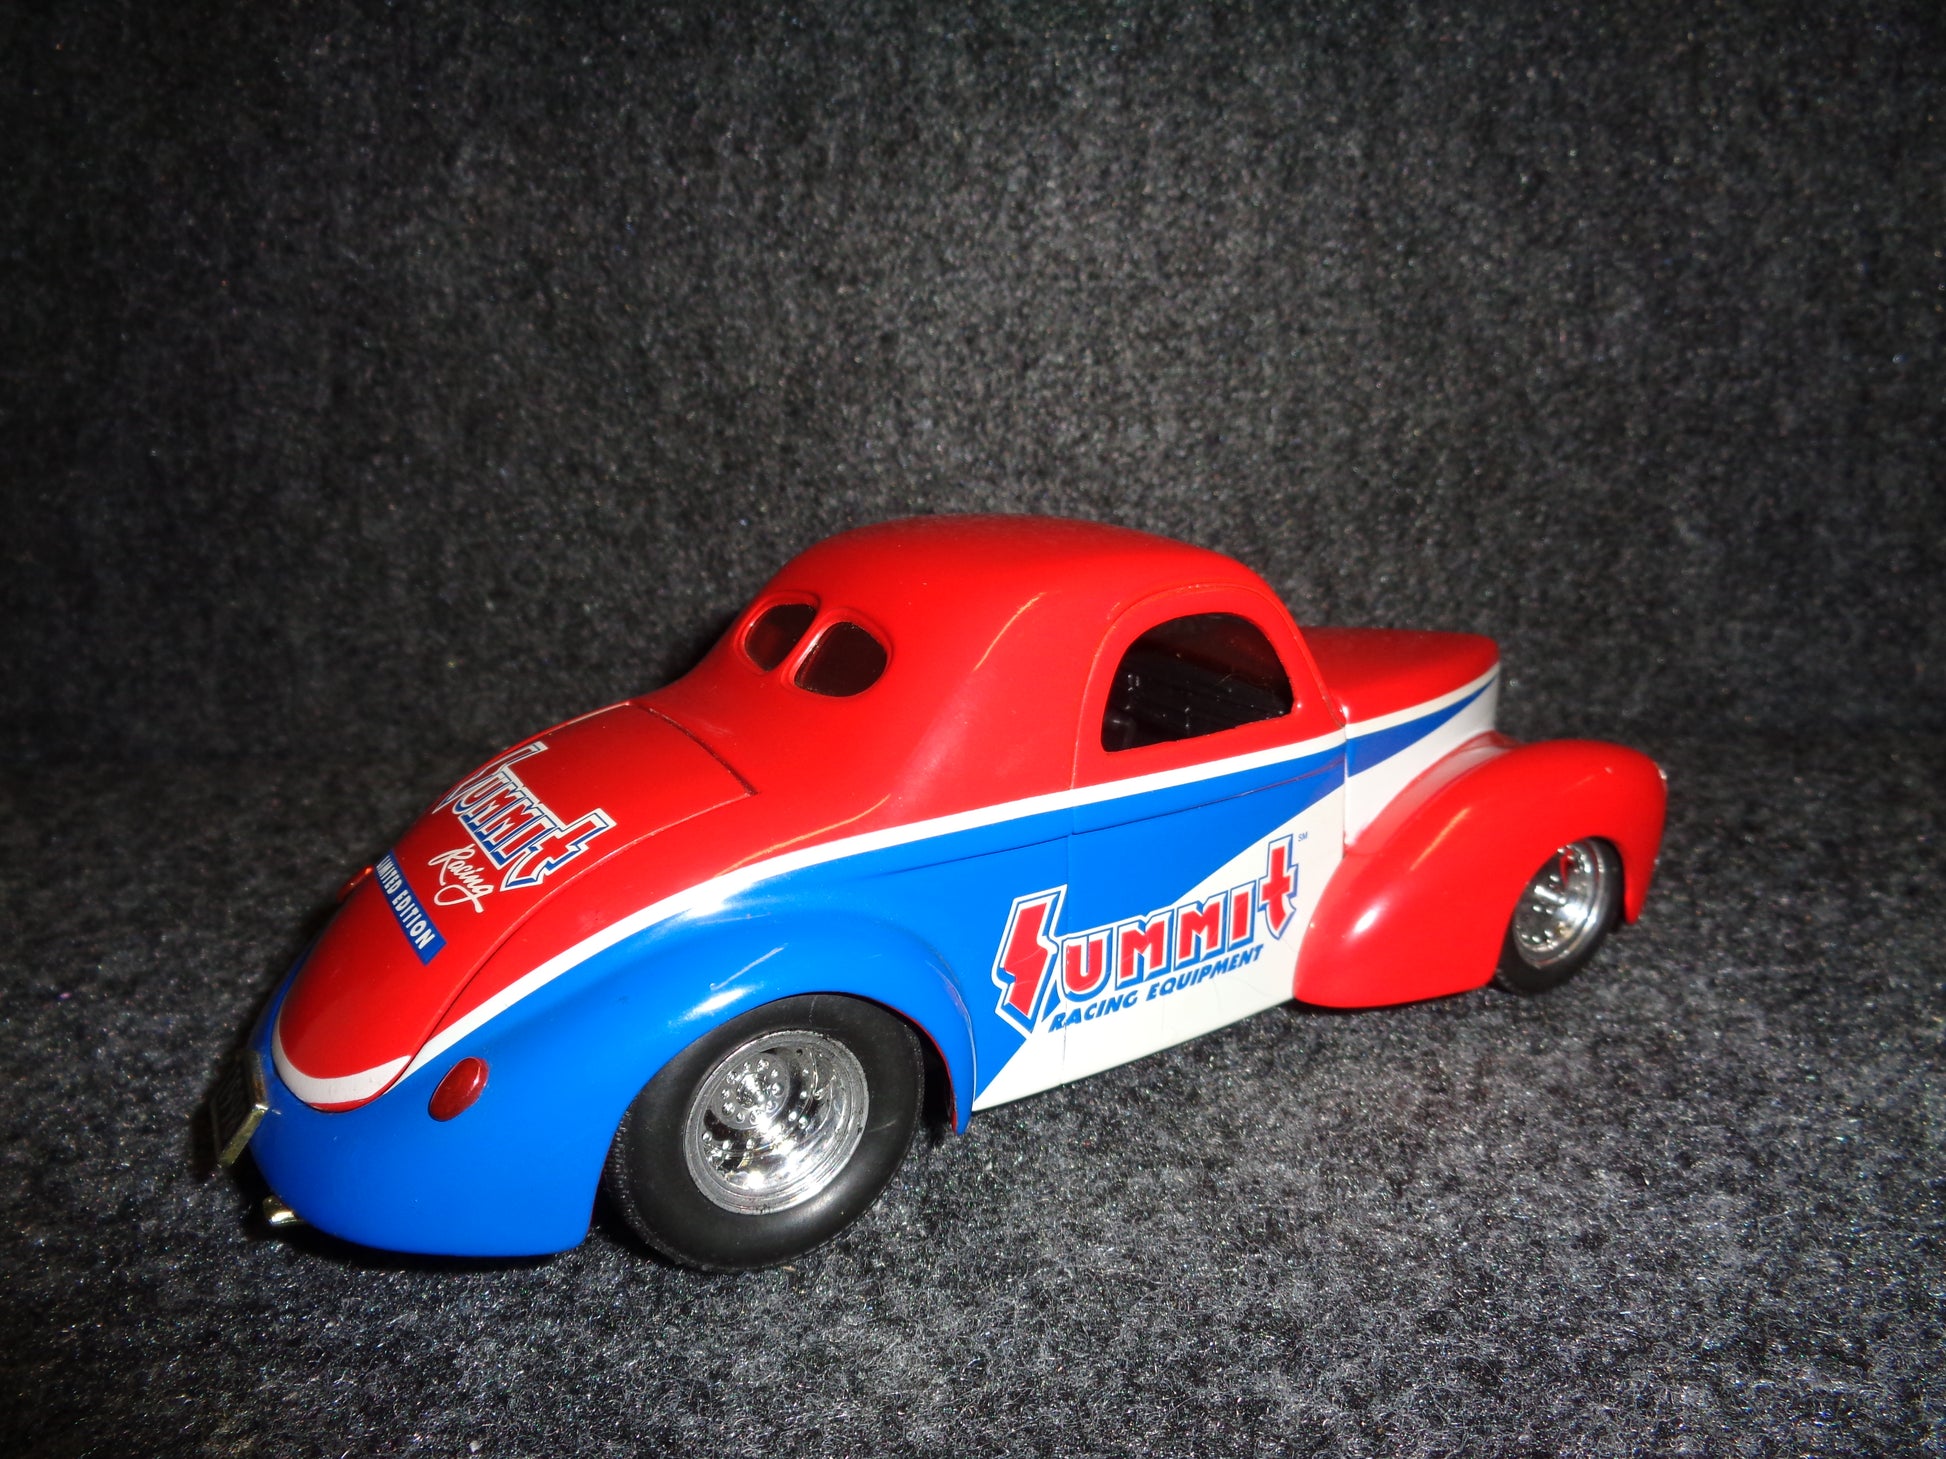 Summit Racing Equipment 1941 Willys Coupe Street Rod